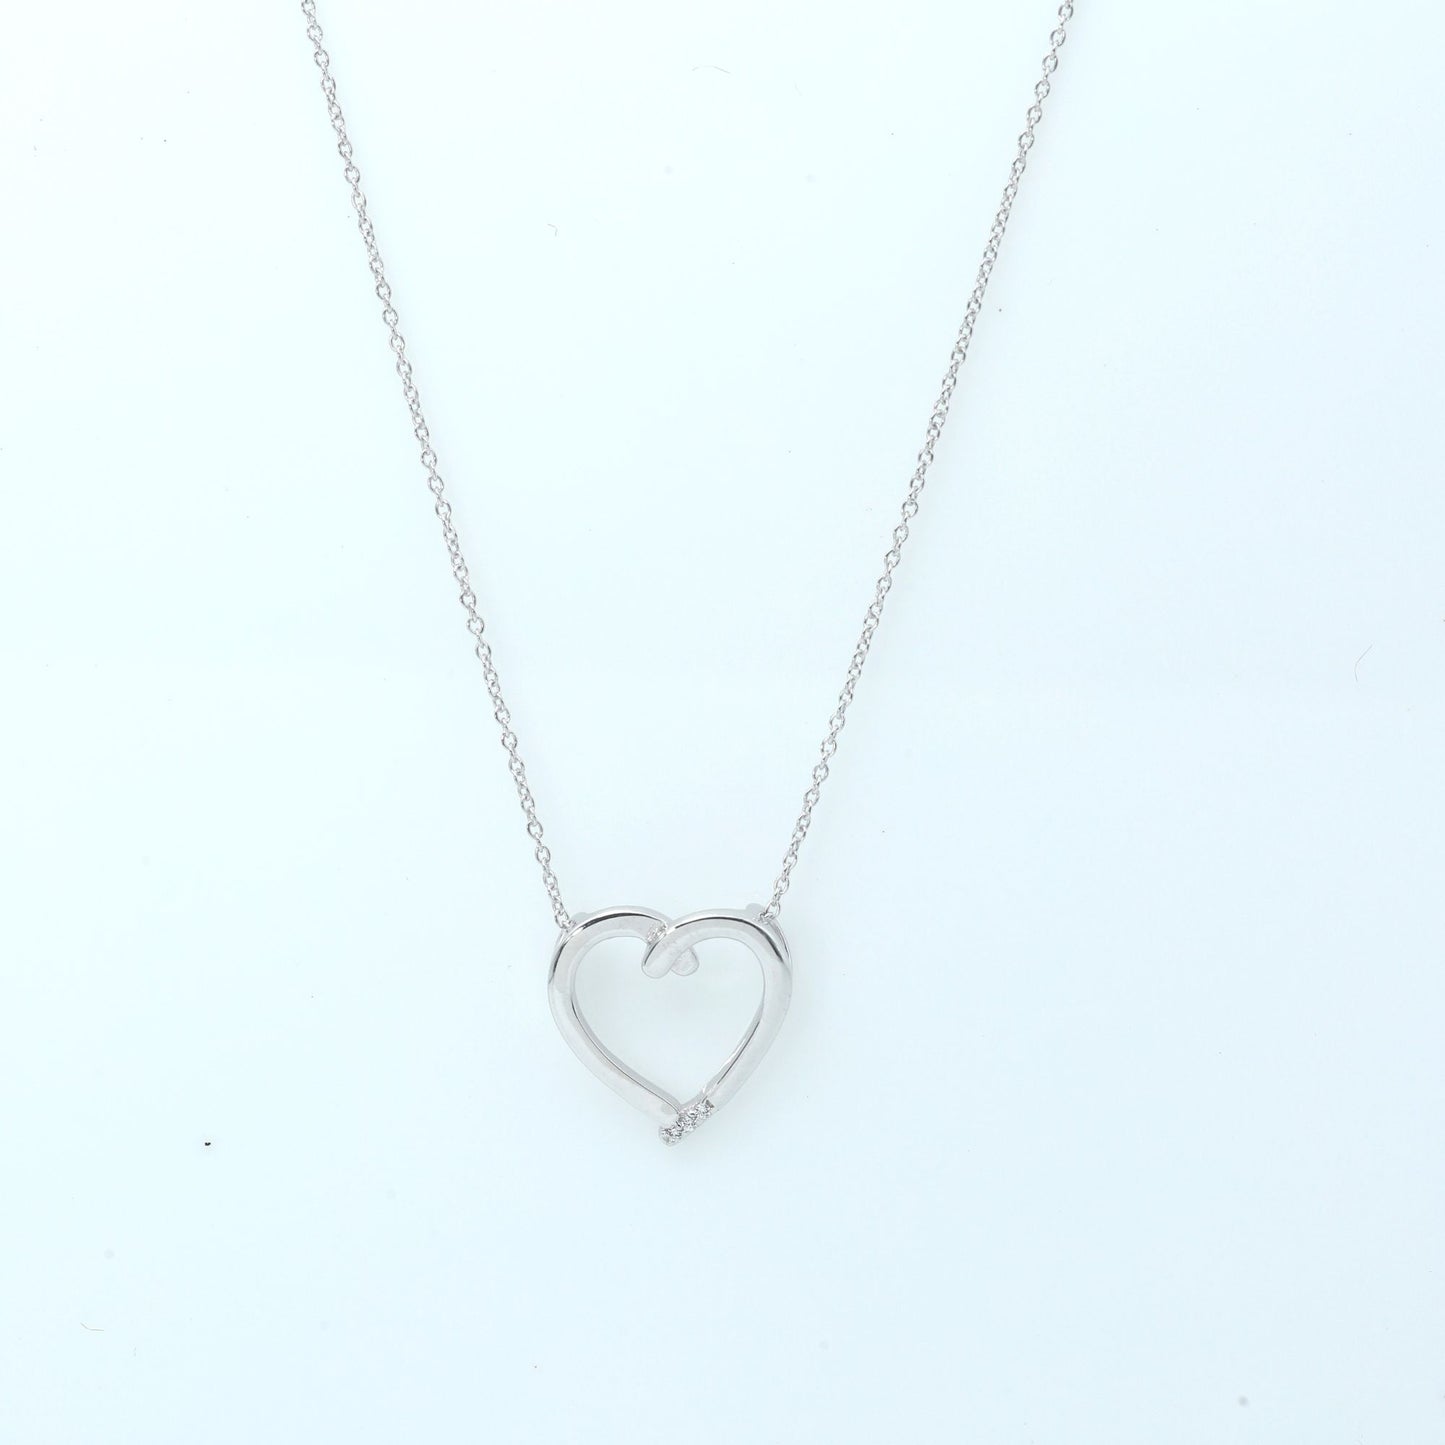 LOOP HEART NECKLACE - STERLING SILVER